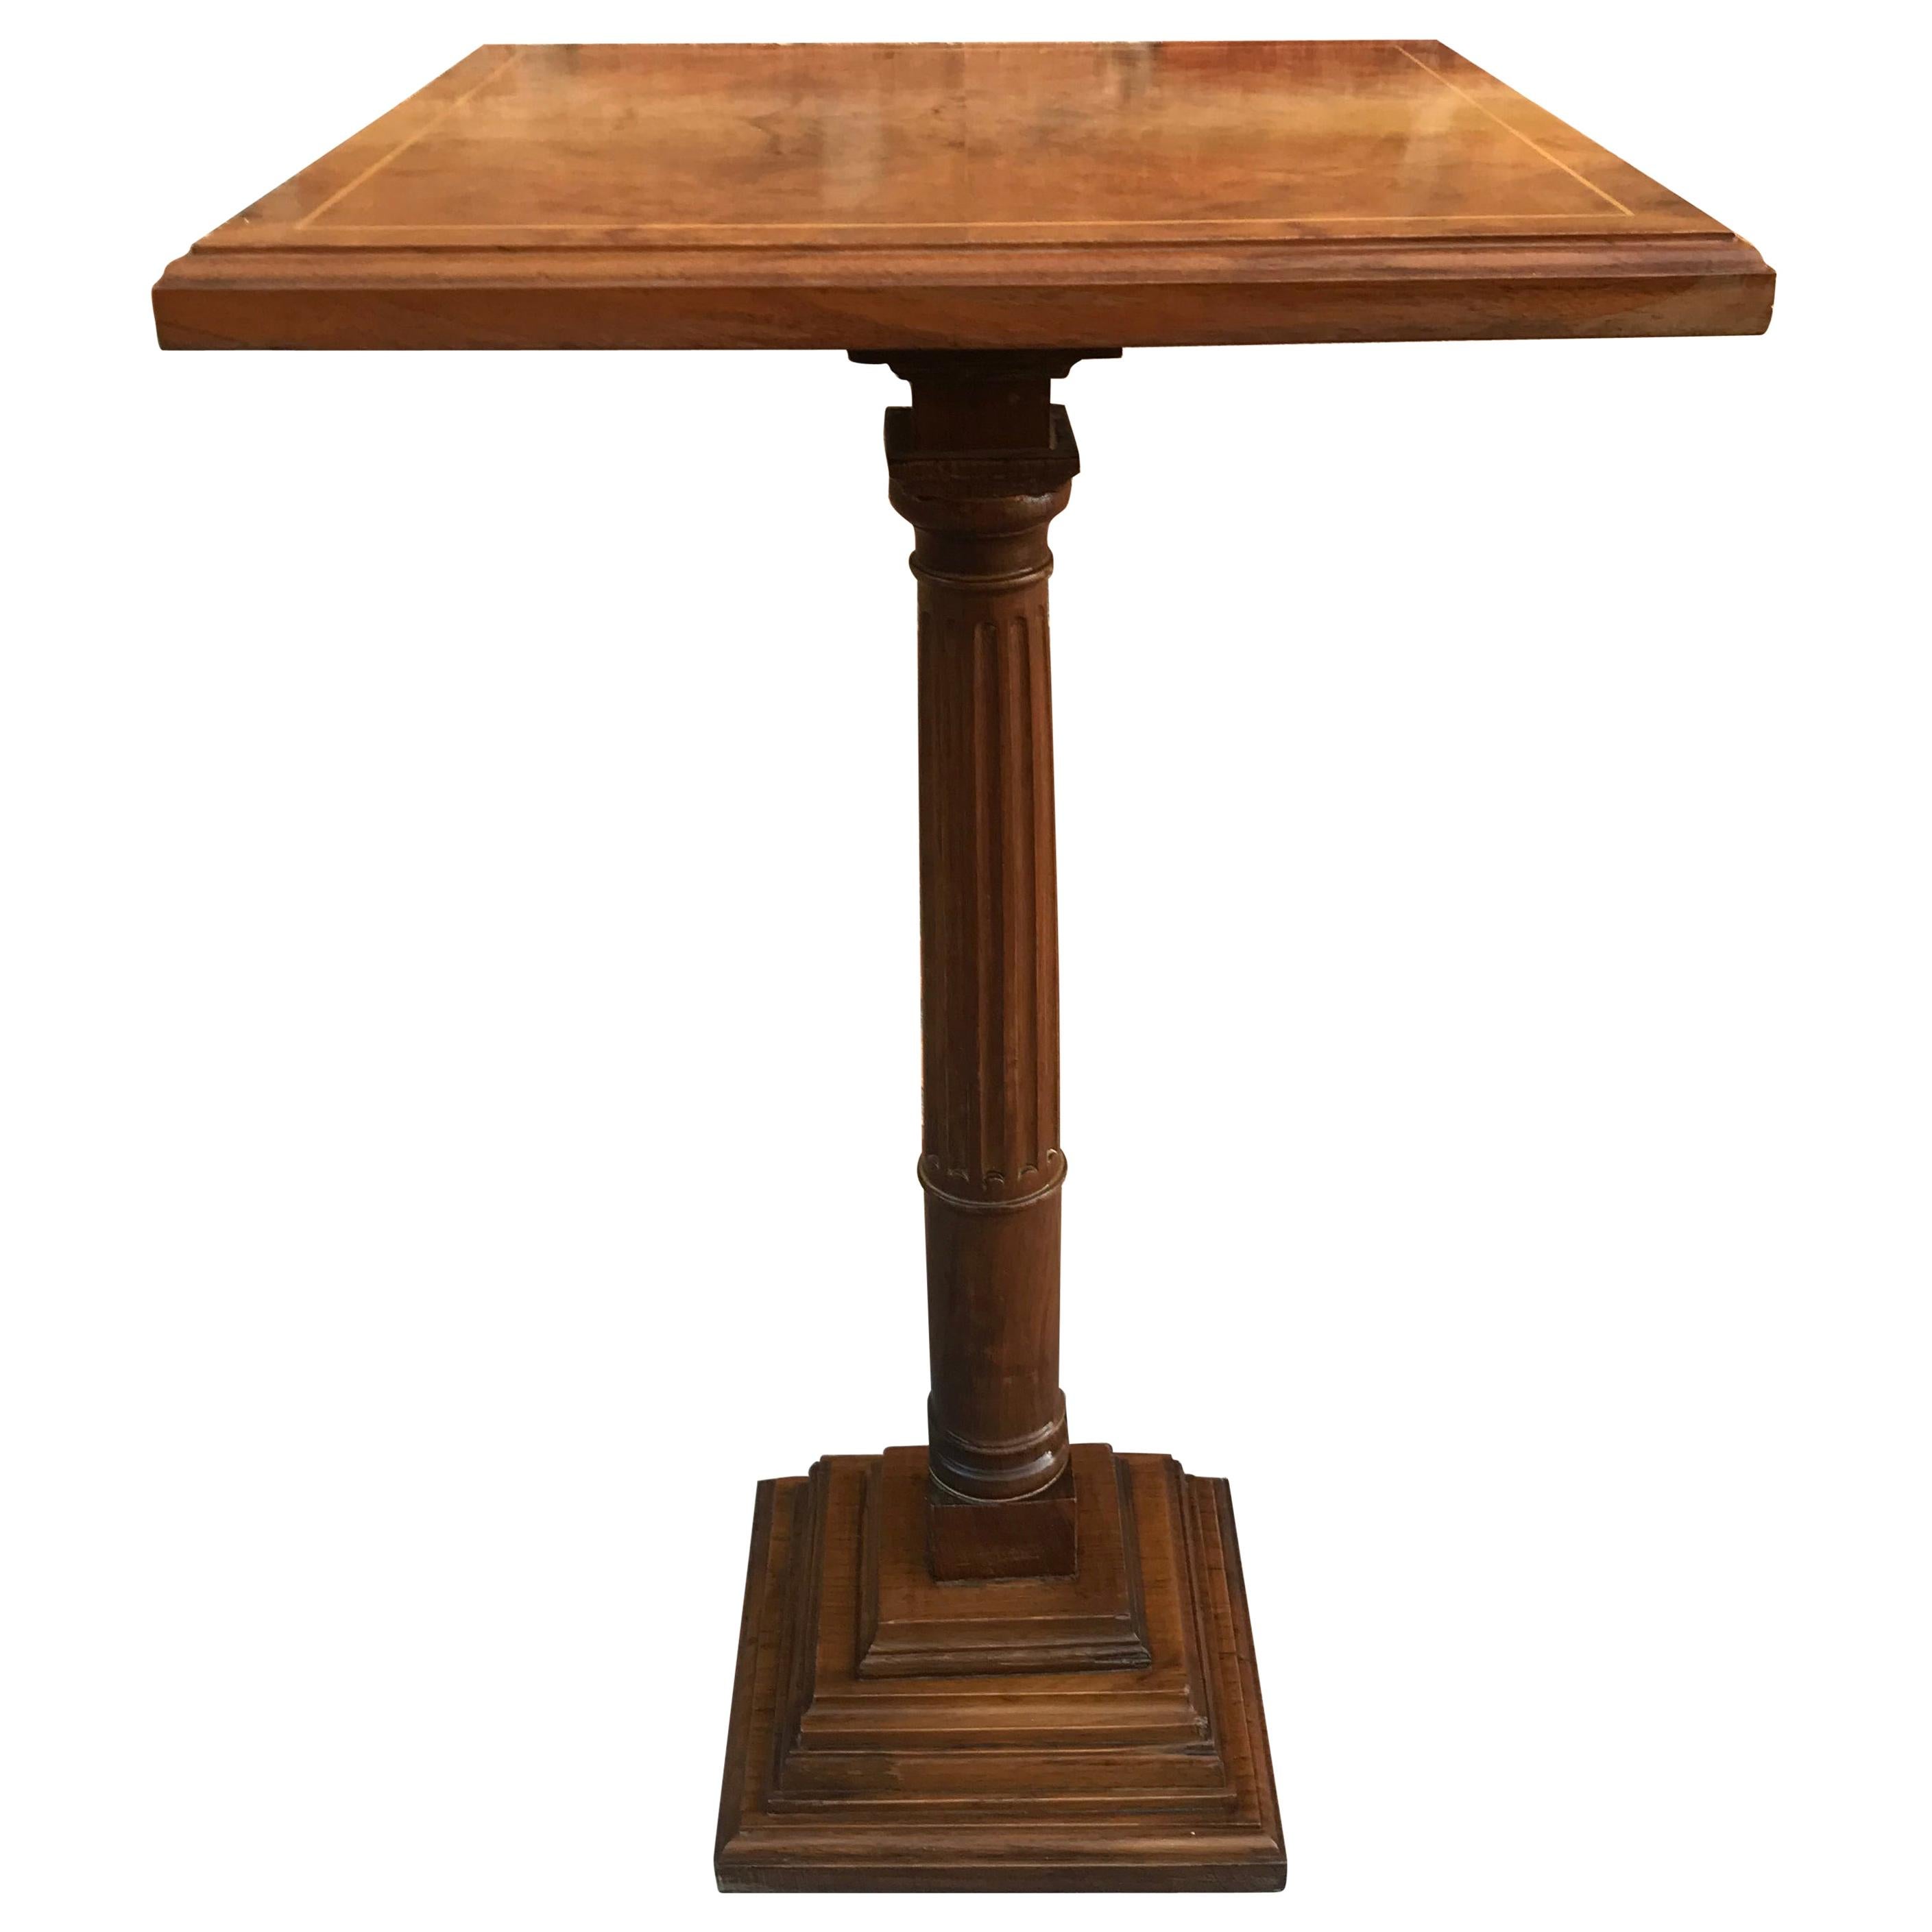 Mid-20th Century Walnut Wood Square Top Pedestal Table